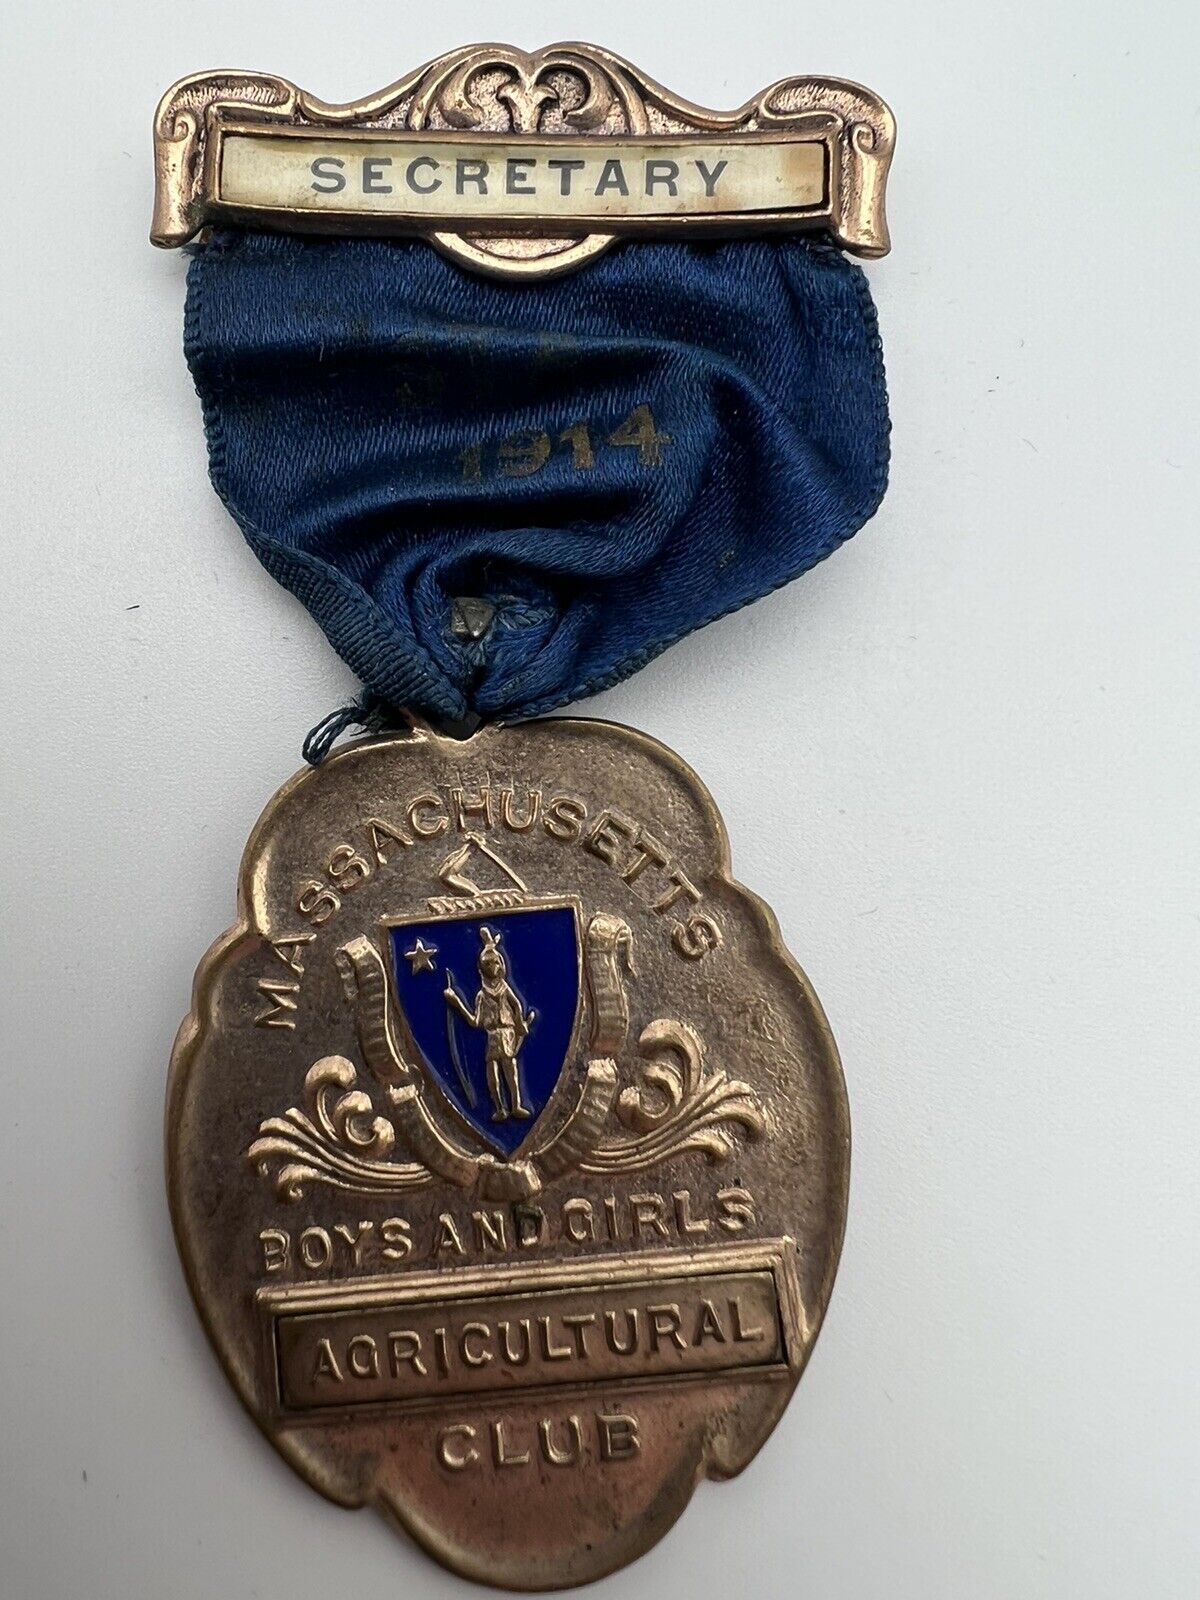 1914 MASSACHUSETTS BOYS AND GIRLS AGRICULTURAL CLUB STATE SECRETARY MEDAL K419